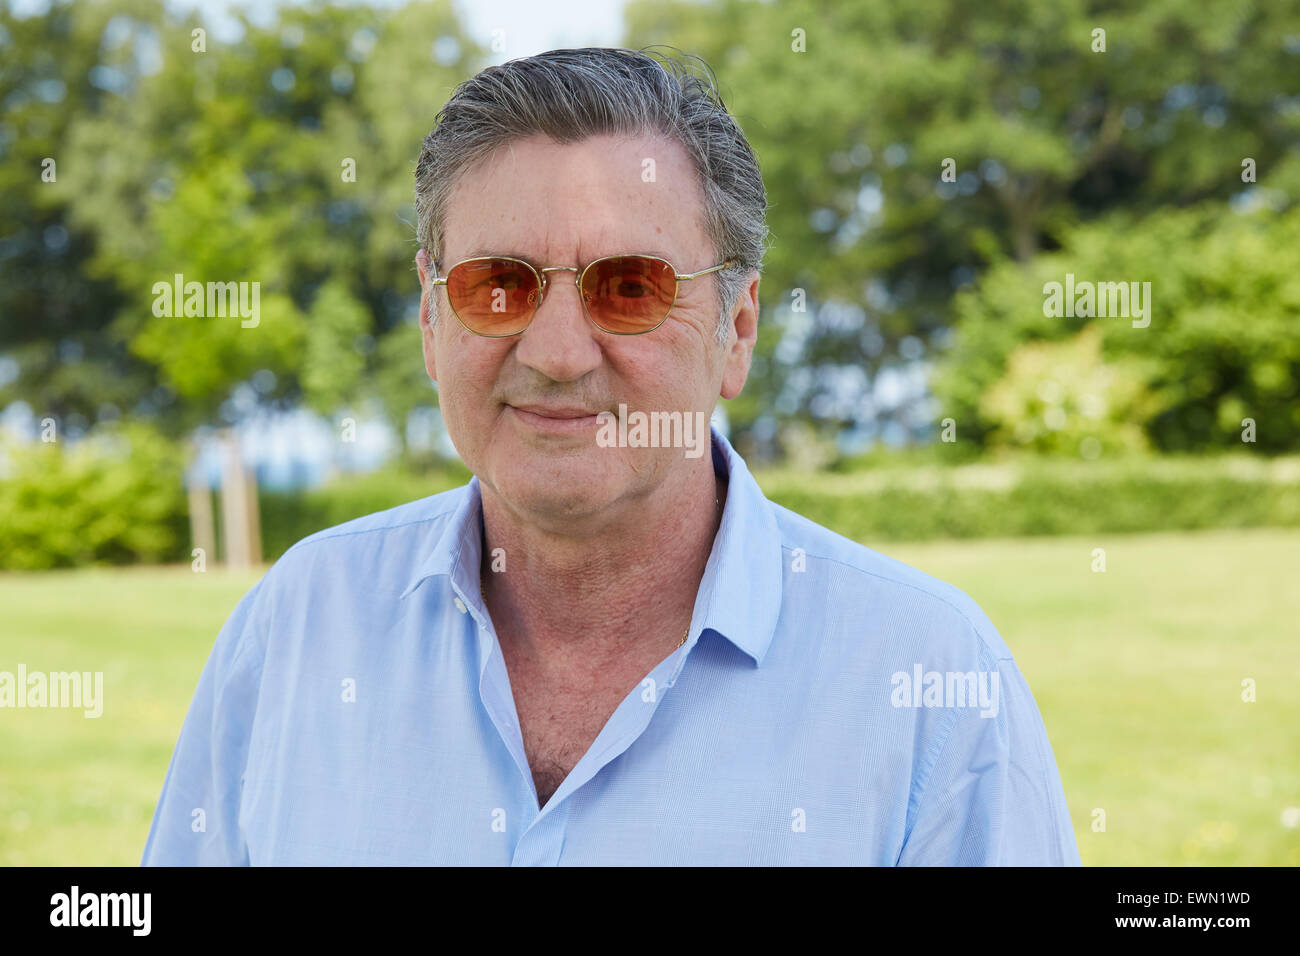 Heiligendamm, Germany. 29th June, 2015. The French actor Daniel Auteuil poses in the margins of the shooting of the Italian-French film production 'Le Confessioni' in Heiligendamm, Germany, 29 June 2015. The thriller is to celebrate its premiere at Cannes film festival in 2016. Photo: GEORG WENDT/dpa/Alamy Live News Stock Photo